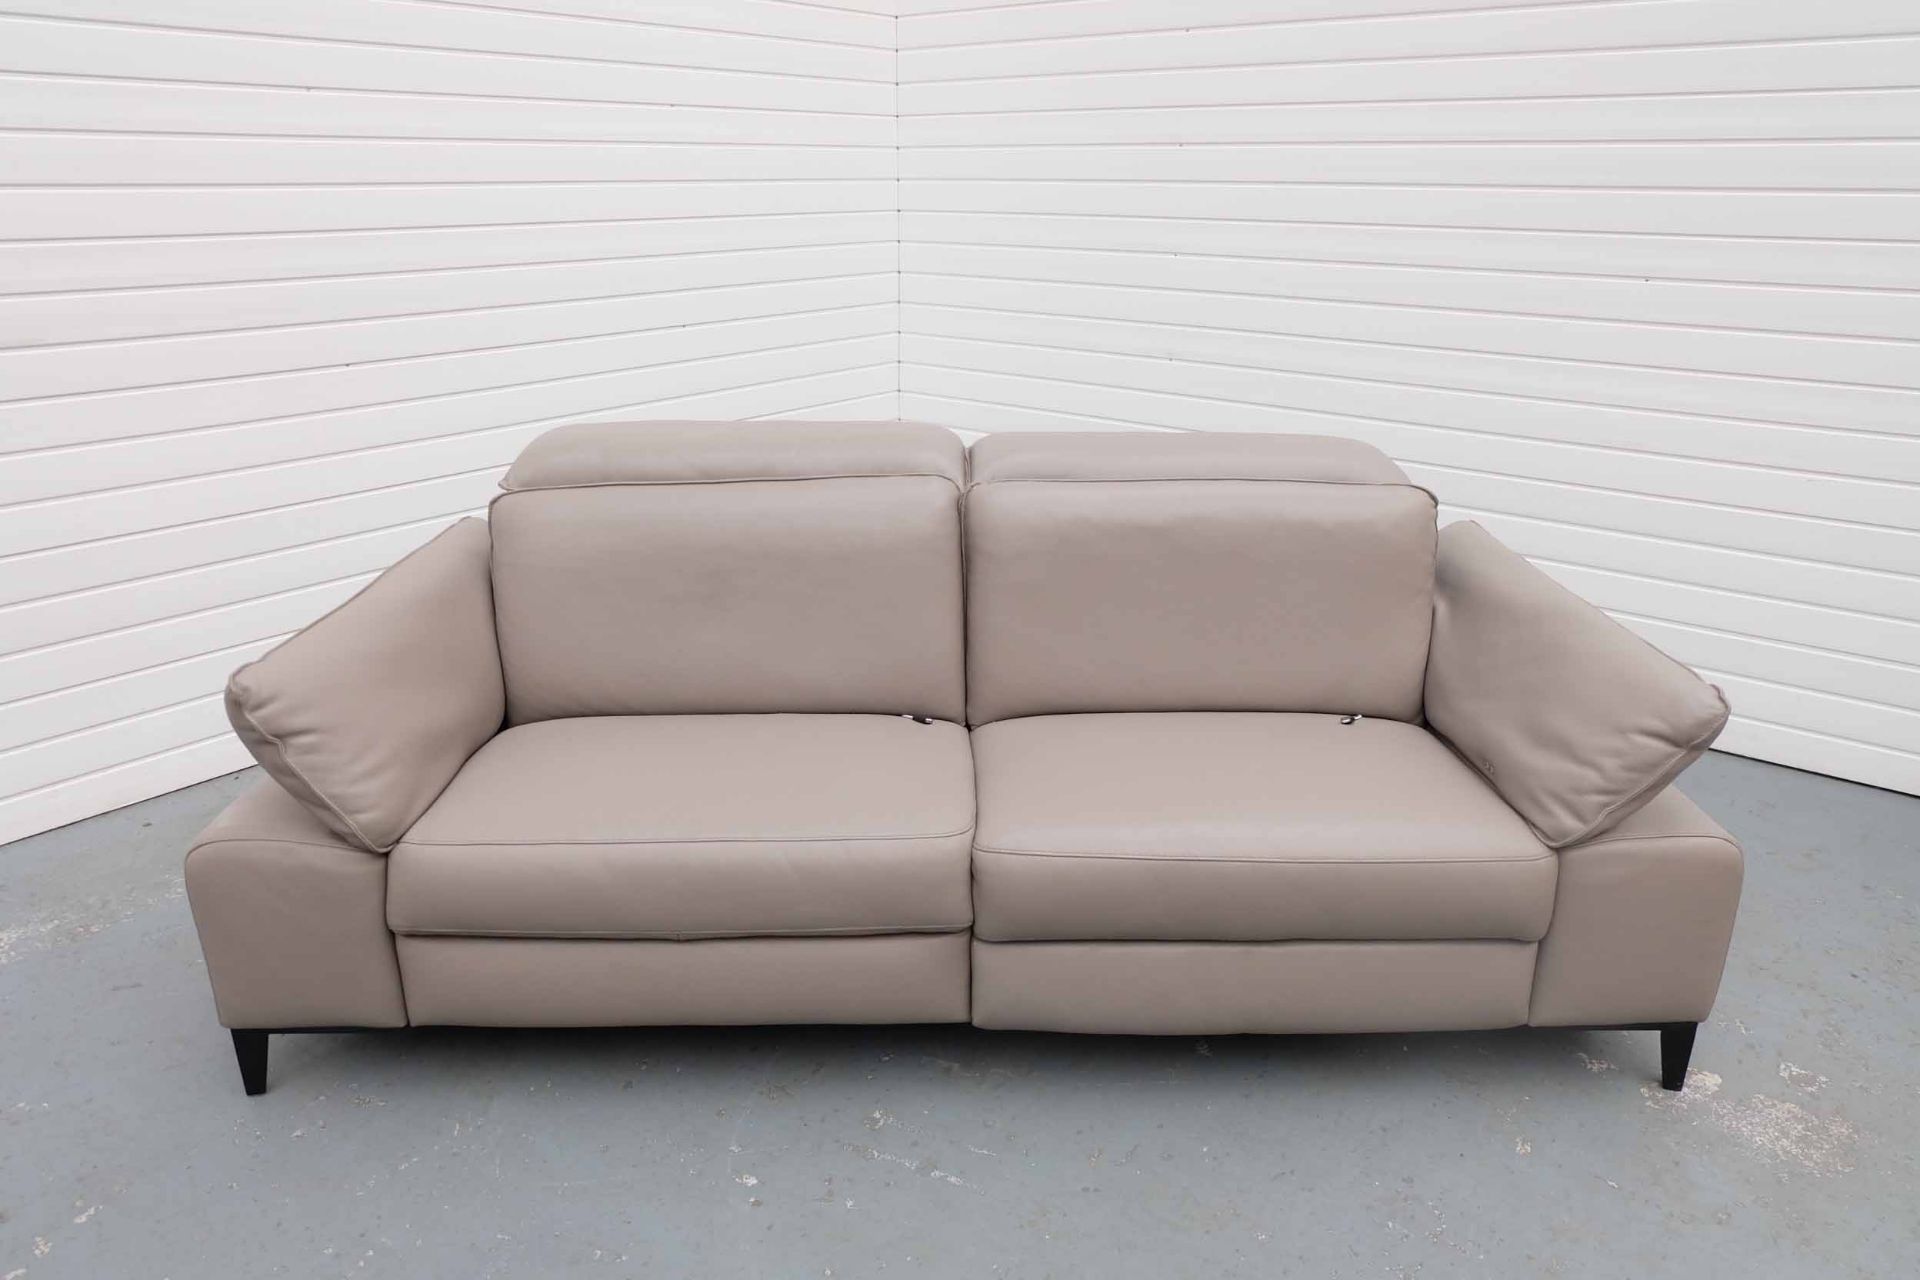 ROM 2 Seater Sofa. Fully Electric Reclining Seat. Manual Headrest. - Image 2 of 10